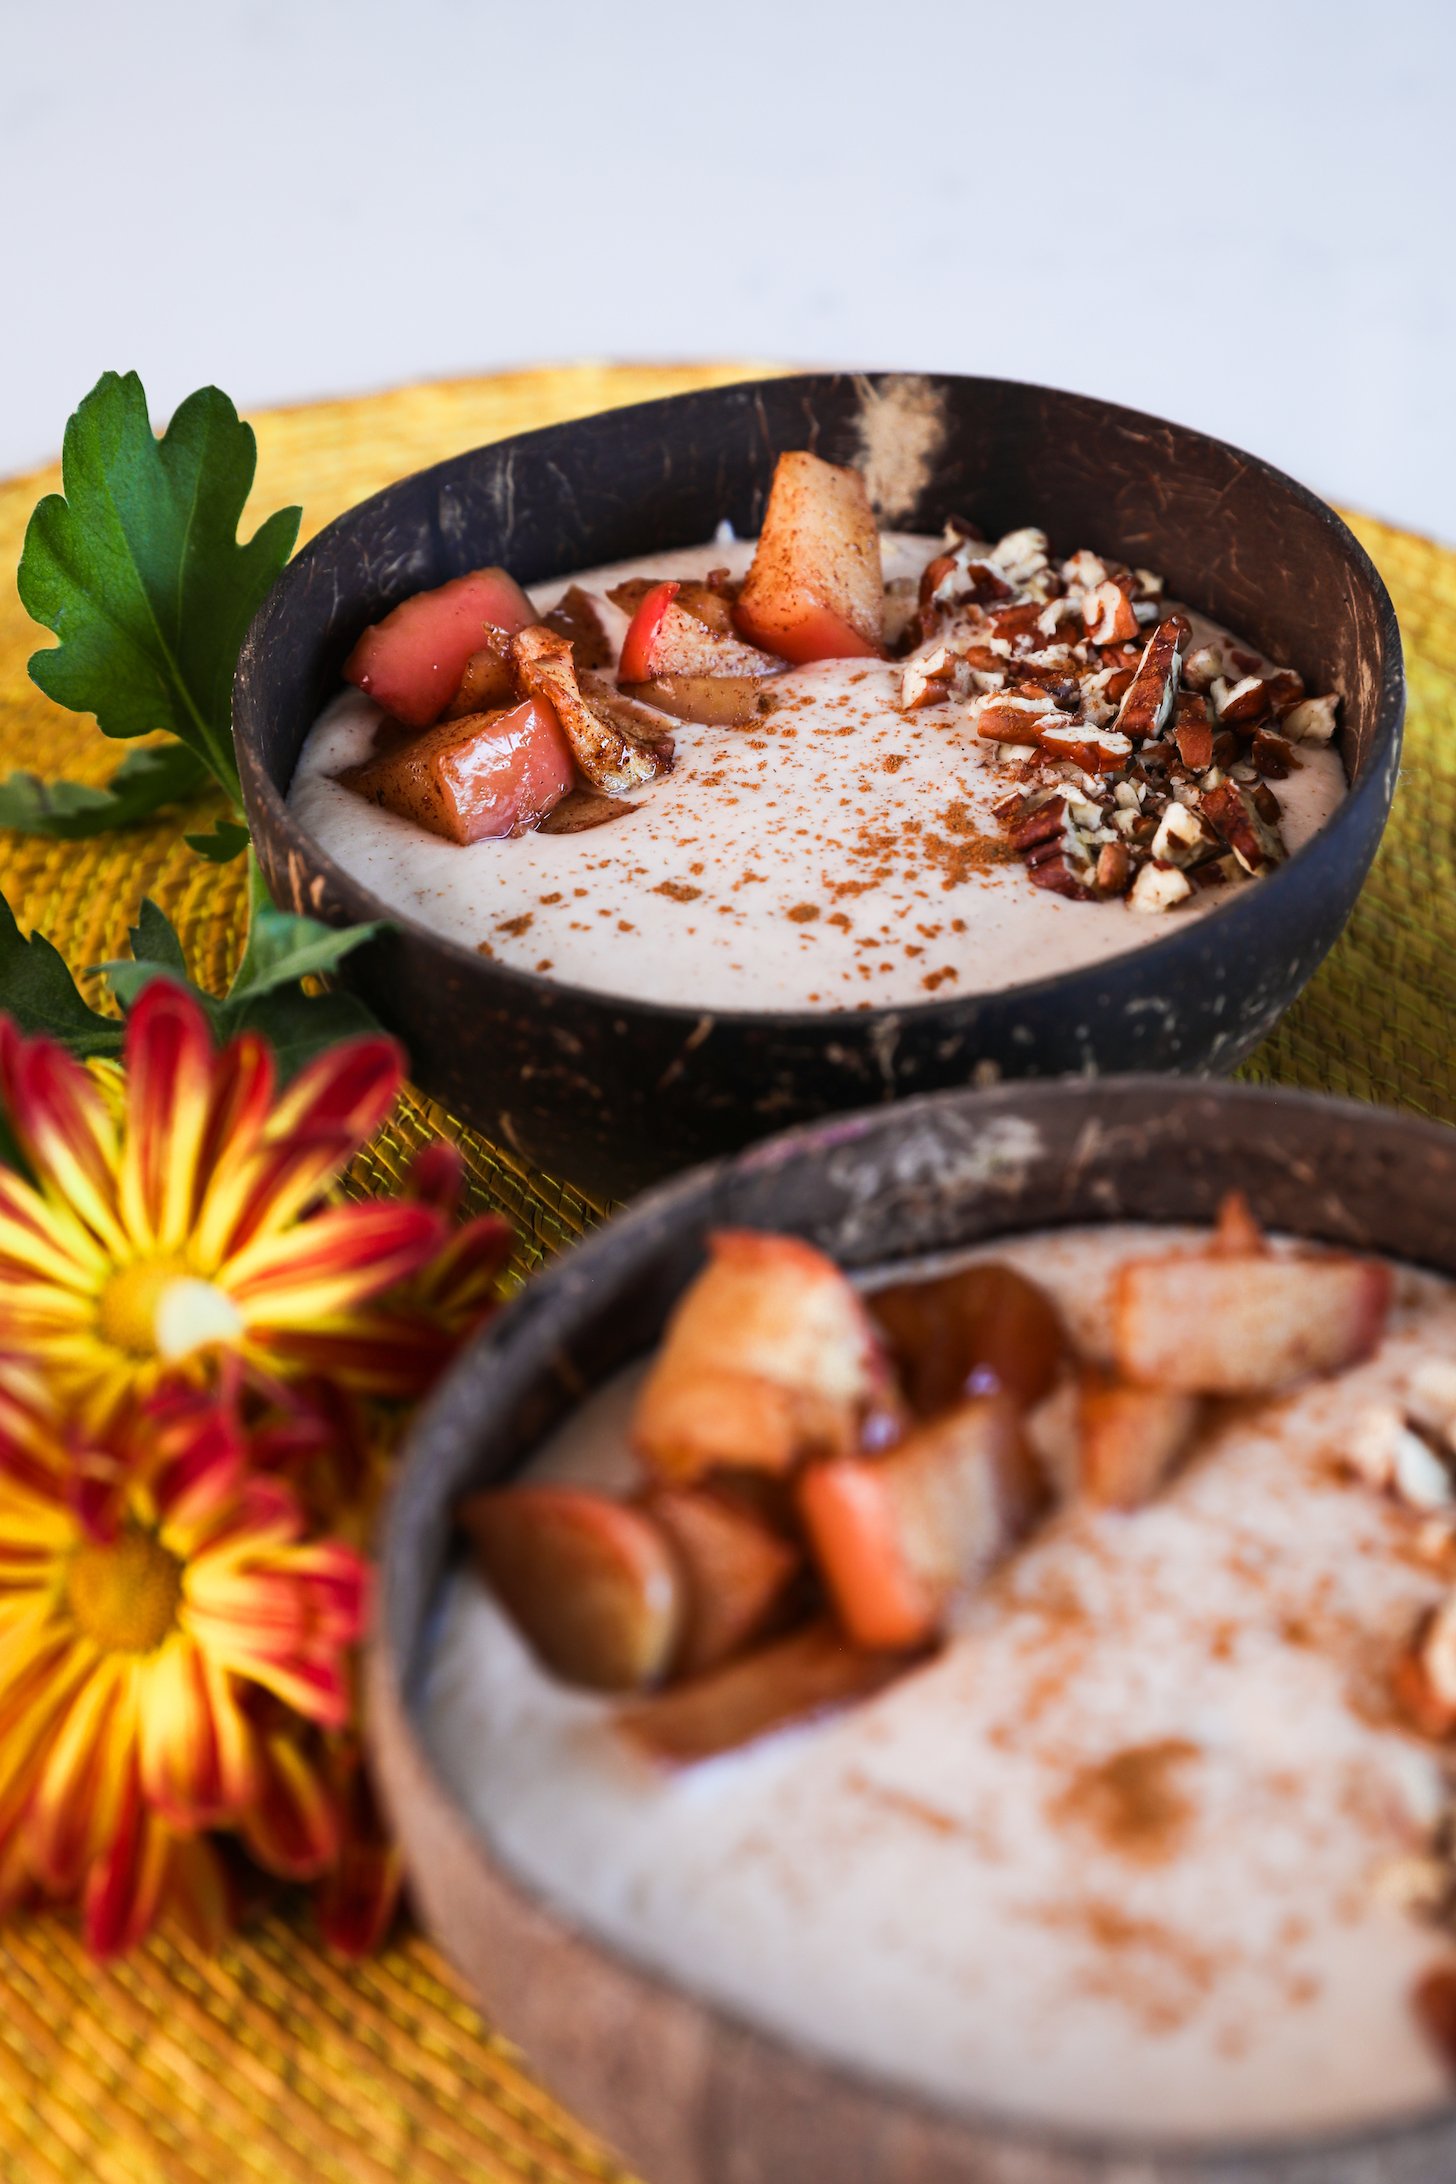 Two coconut bowls with beige smoothie, garnished with baked apple slices, pecans, and cinnamon, one in focus, the other blurred, with nearby bright yellow flowers.